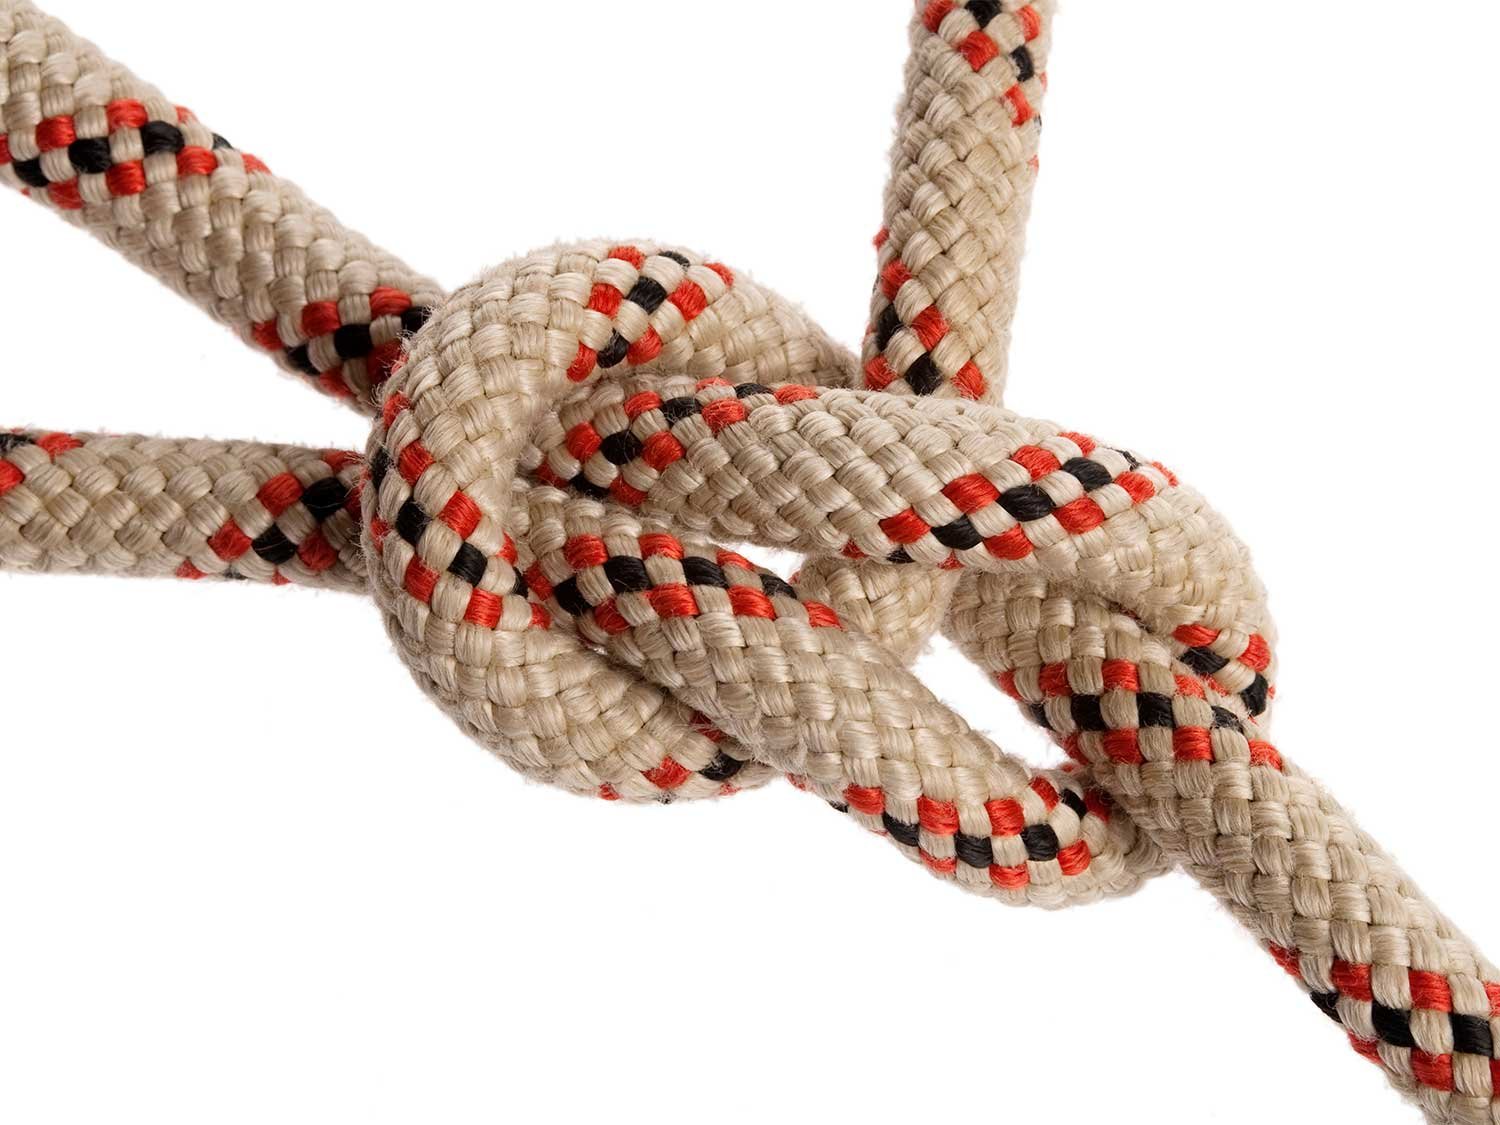 How to Tie a Knot: 10 Basic Ties Every Sportsmen Should Know